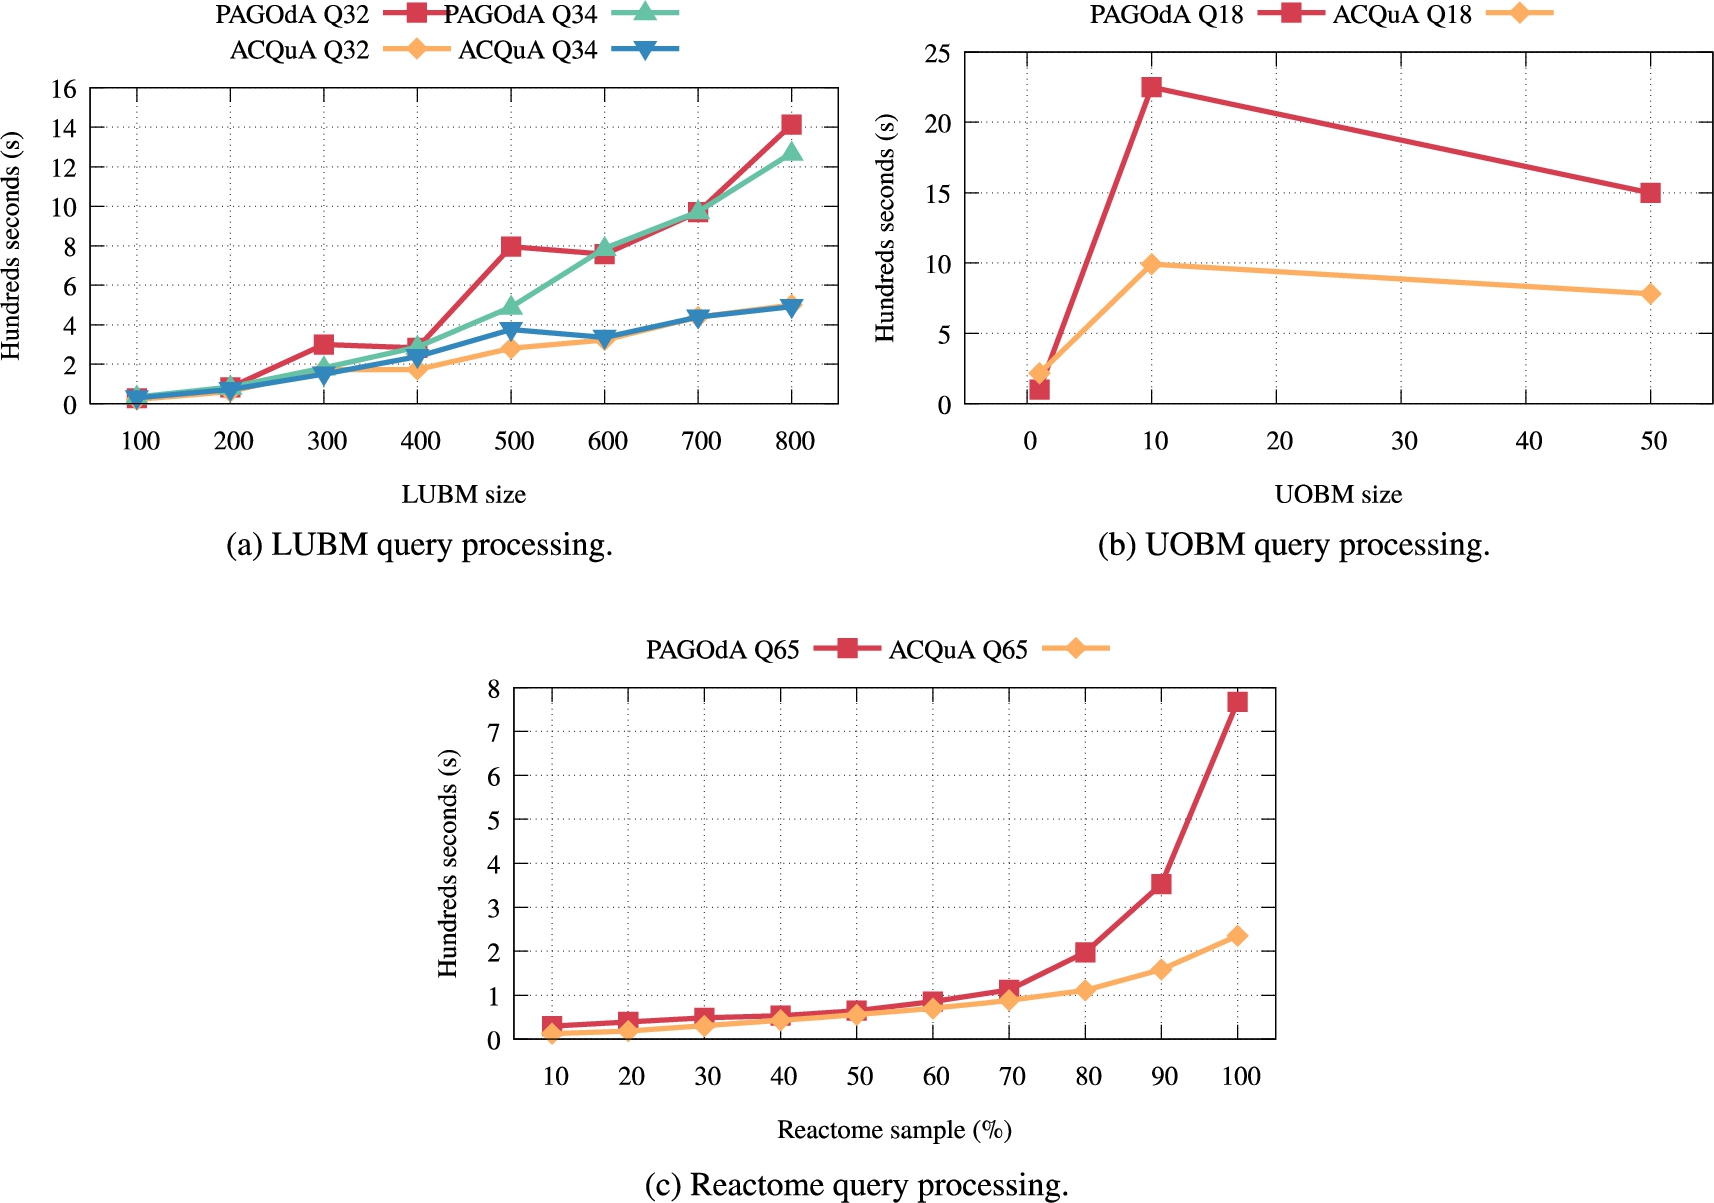 Scalability of query processing times for LUBM, UOBM and Reactome in ACQuA vs PAGOdA.